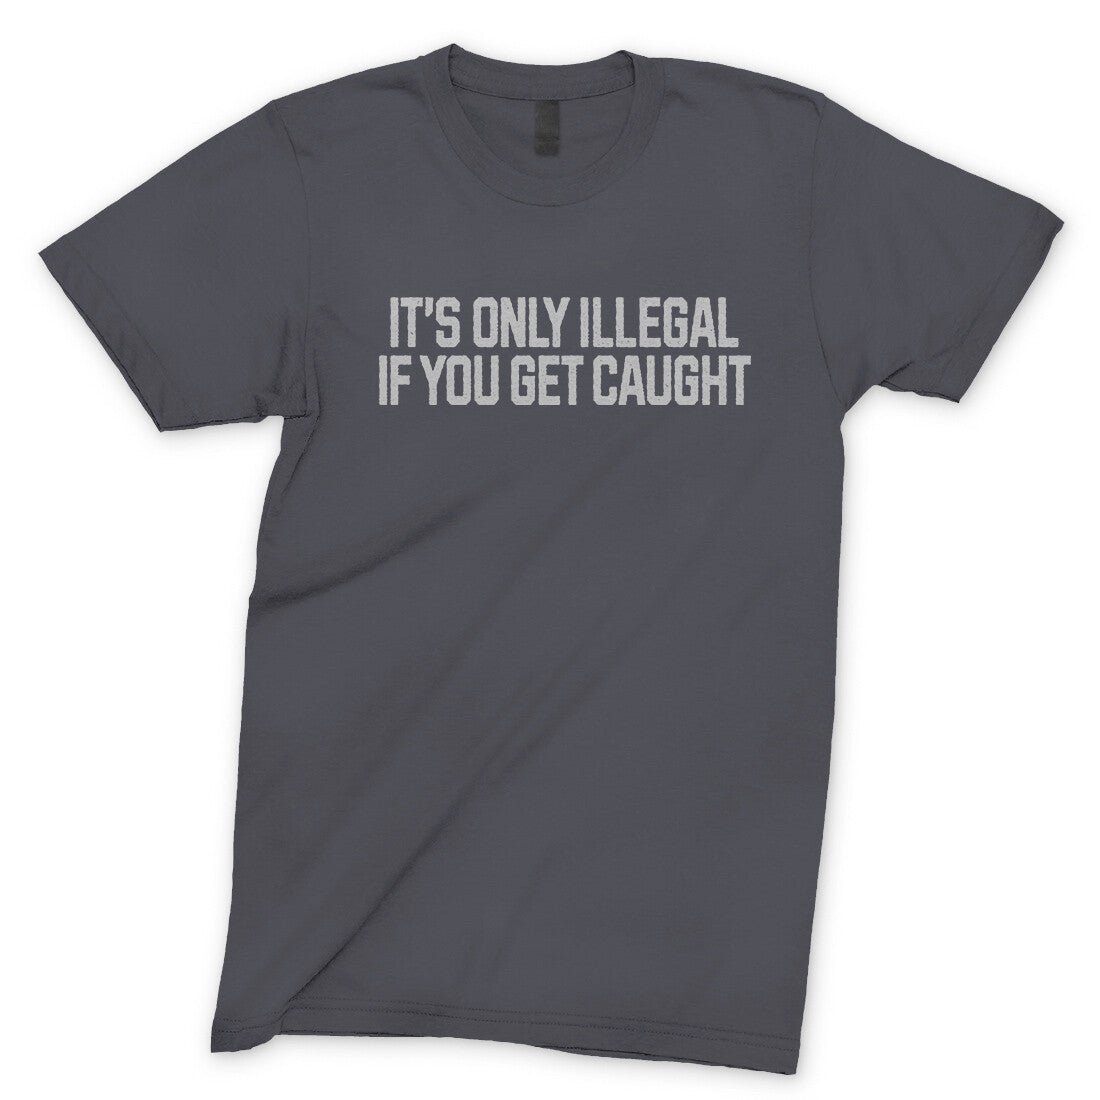 It’s Only Illegal If You Get Caught in Charcoal Color